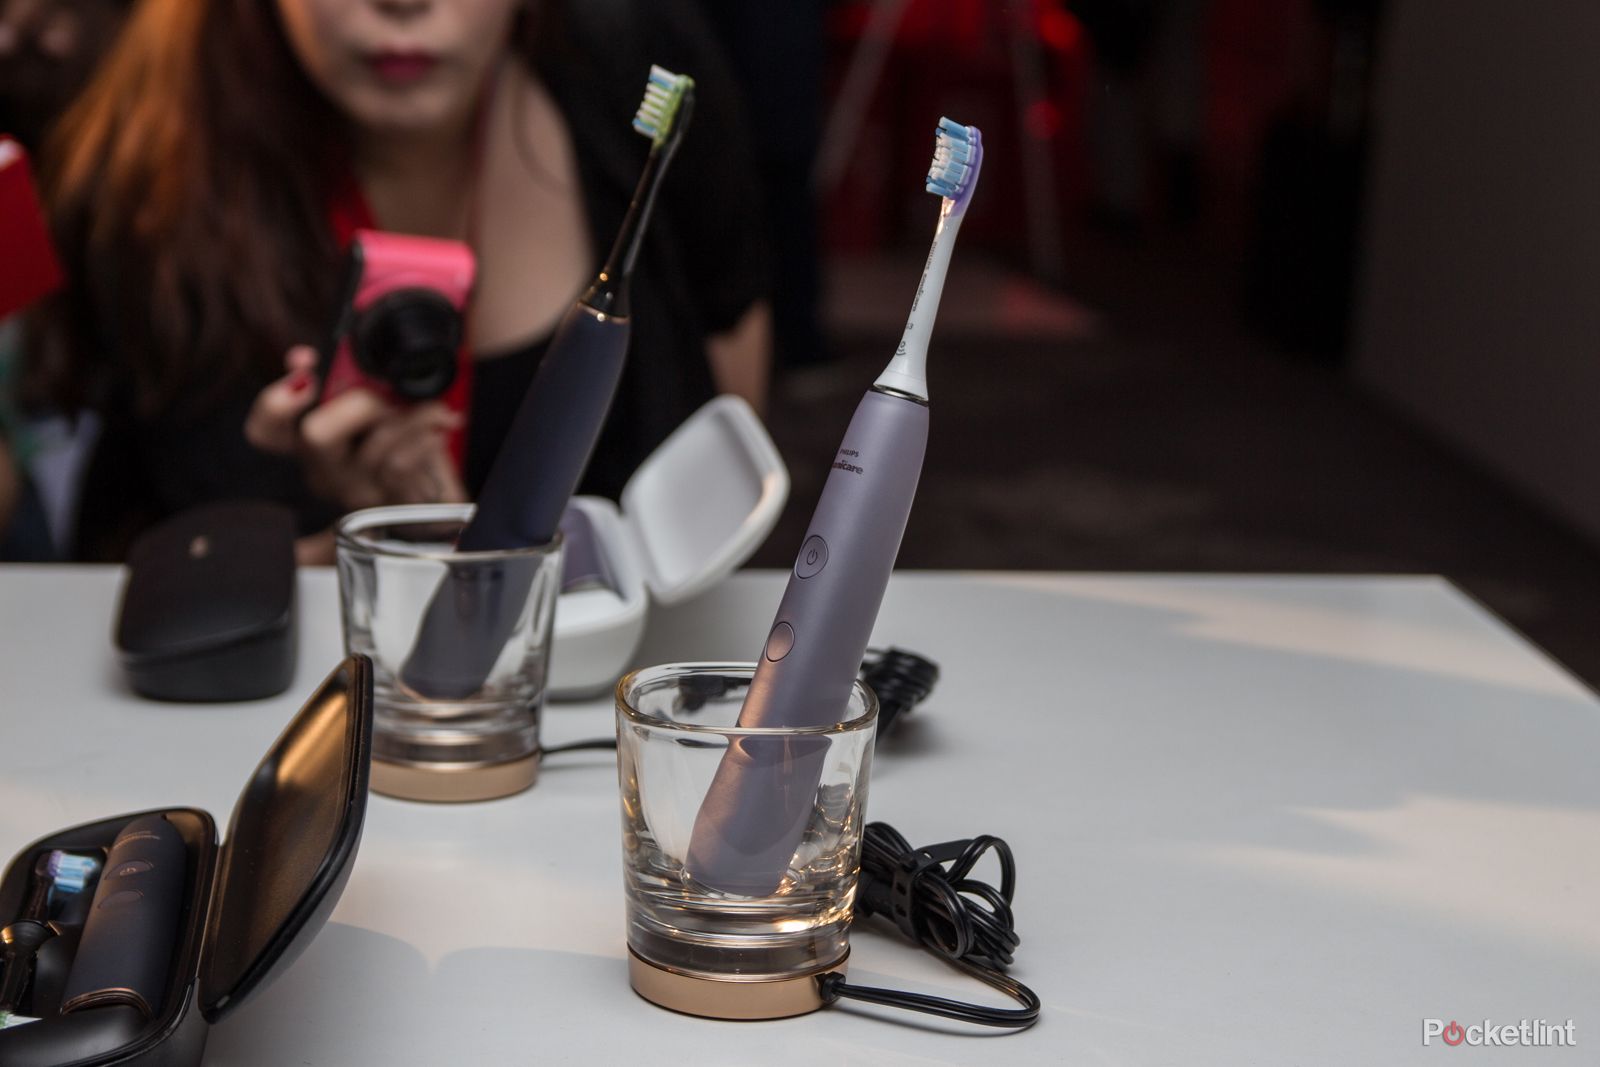 philips sonicare diamondclean smart wants to make oral care sexy with connected toothbrush image 1